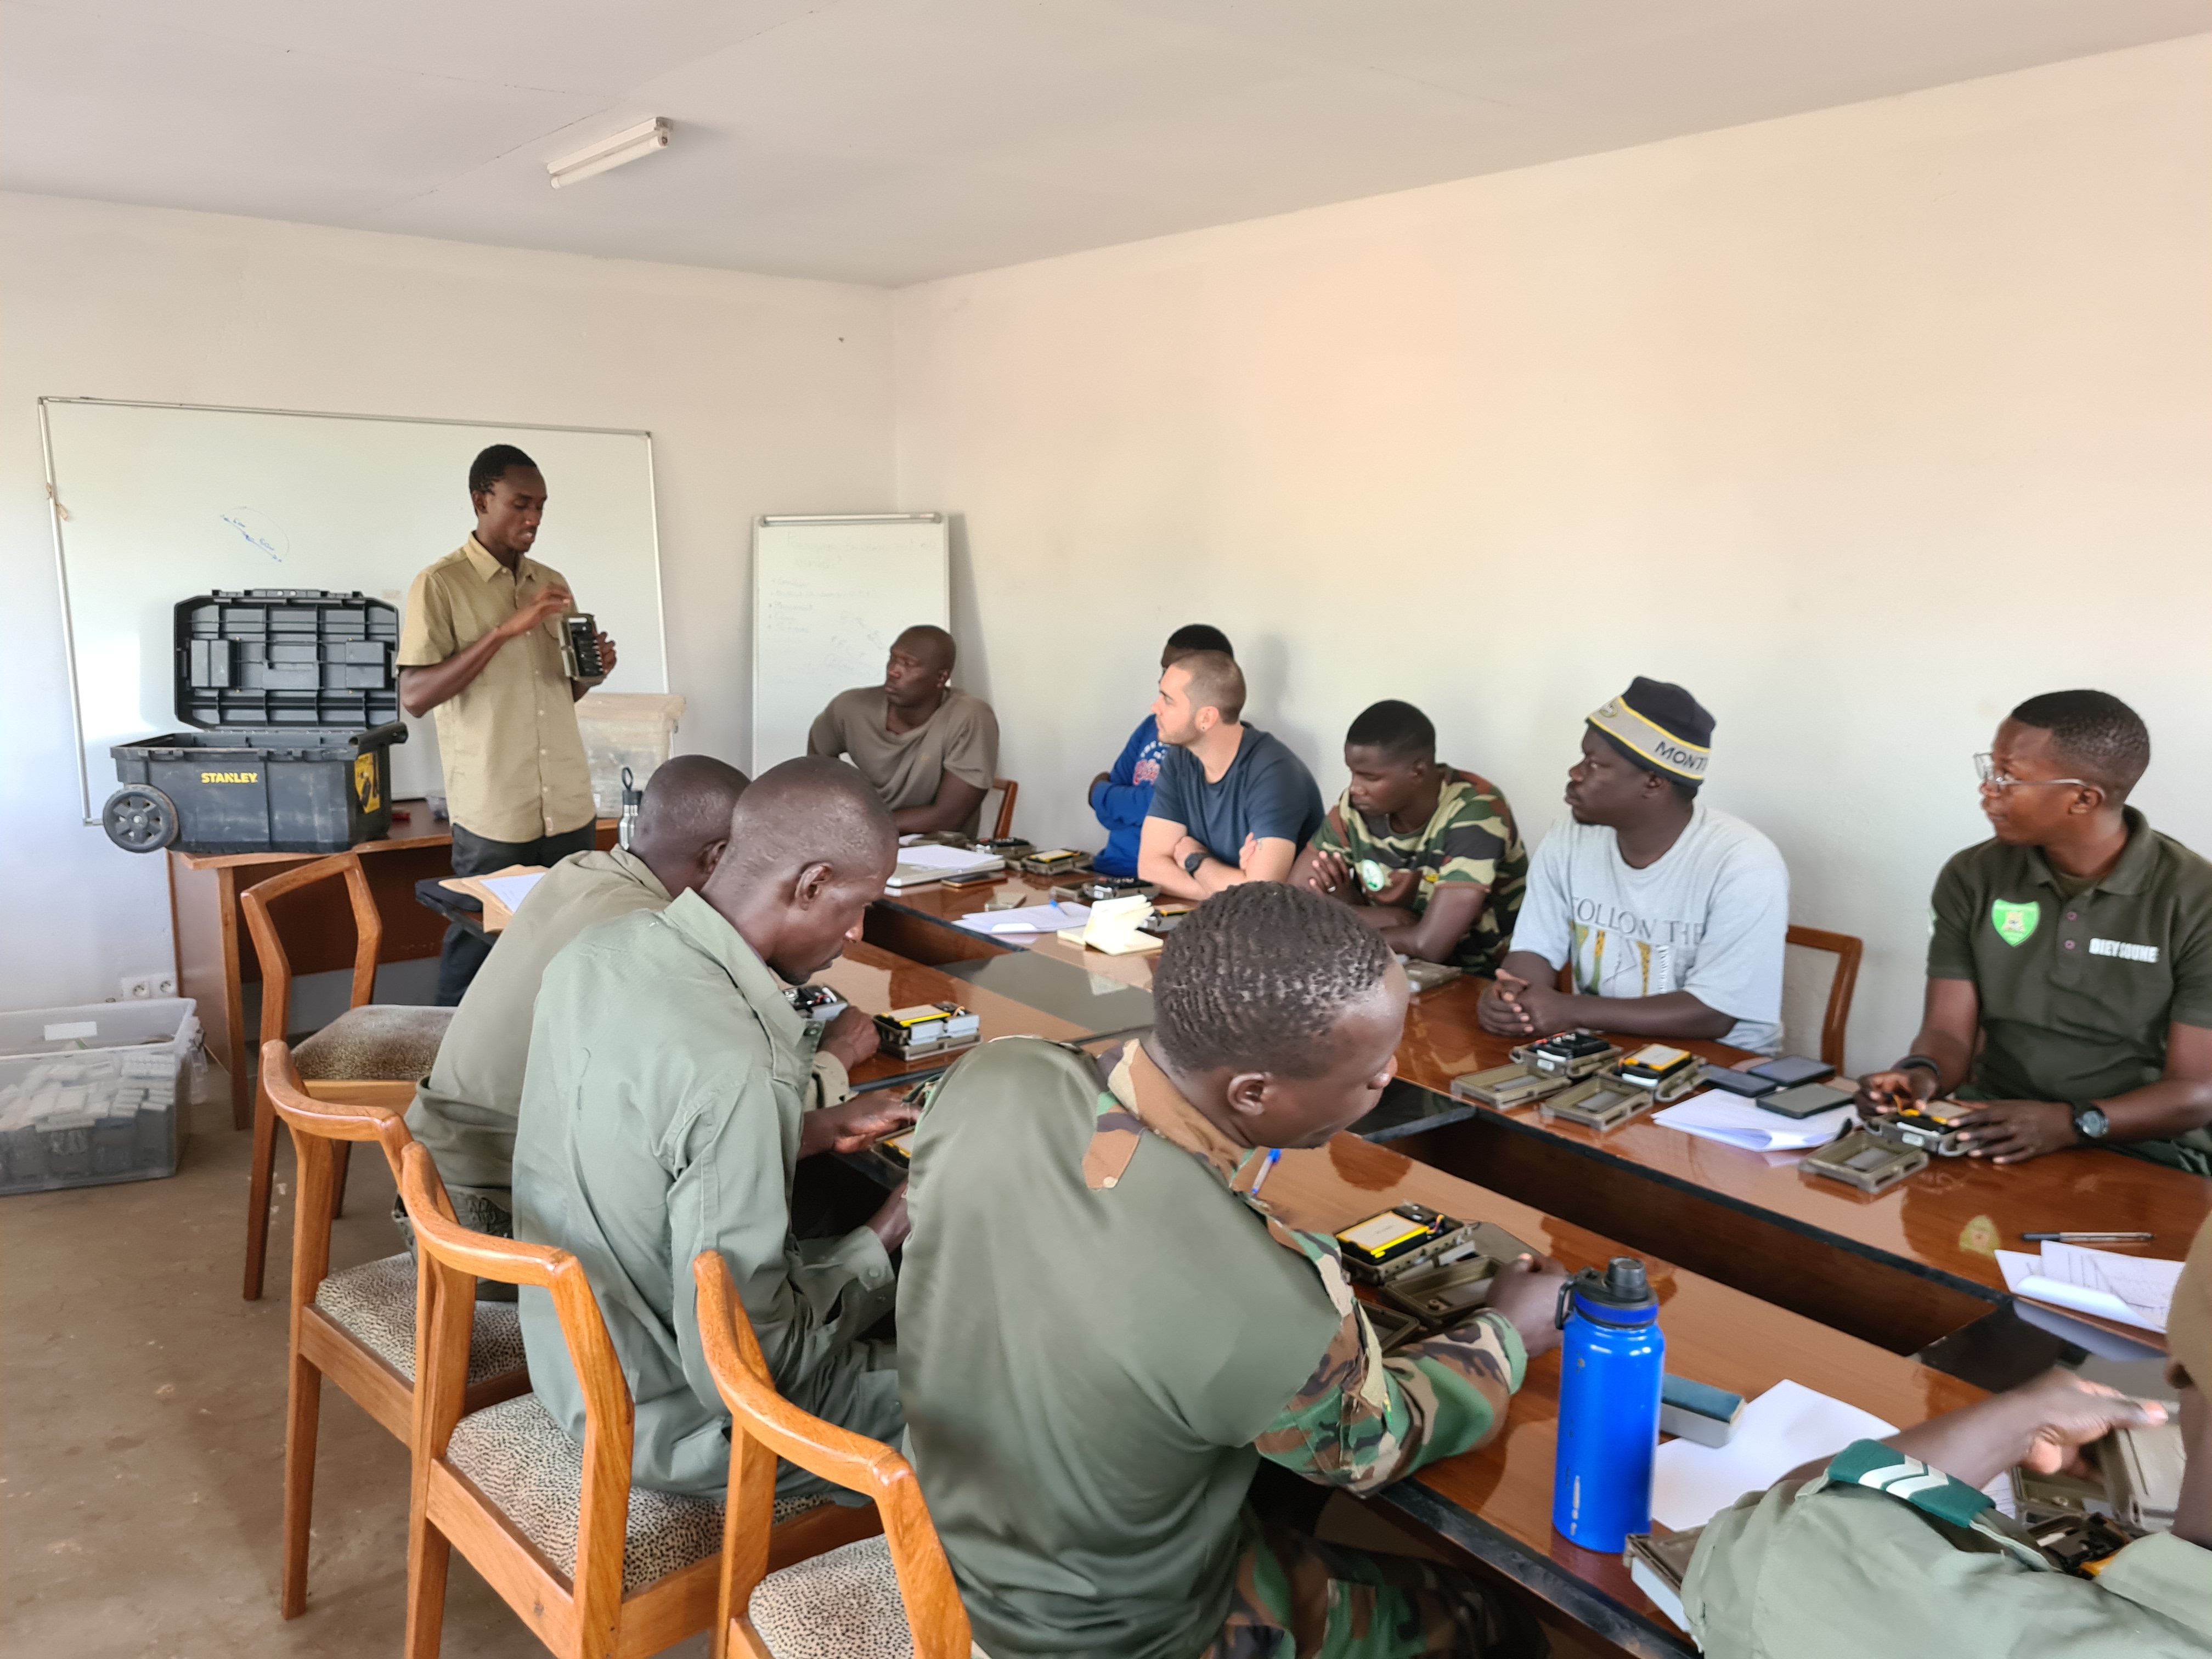 Panthera staff providing technical training to team leaders from the DPN and ZSL partners on operating and deploying the different camera models to be used for this survey.